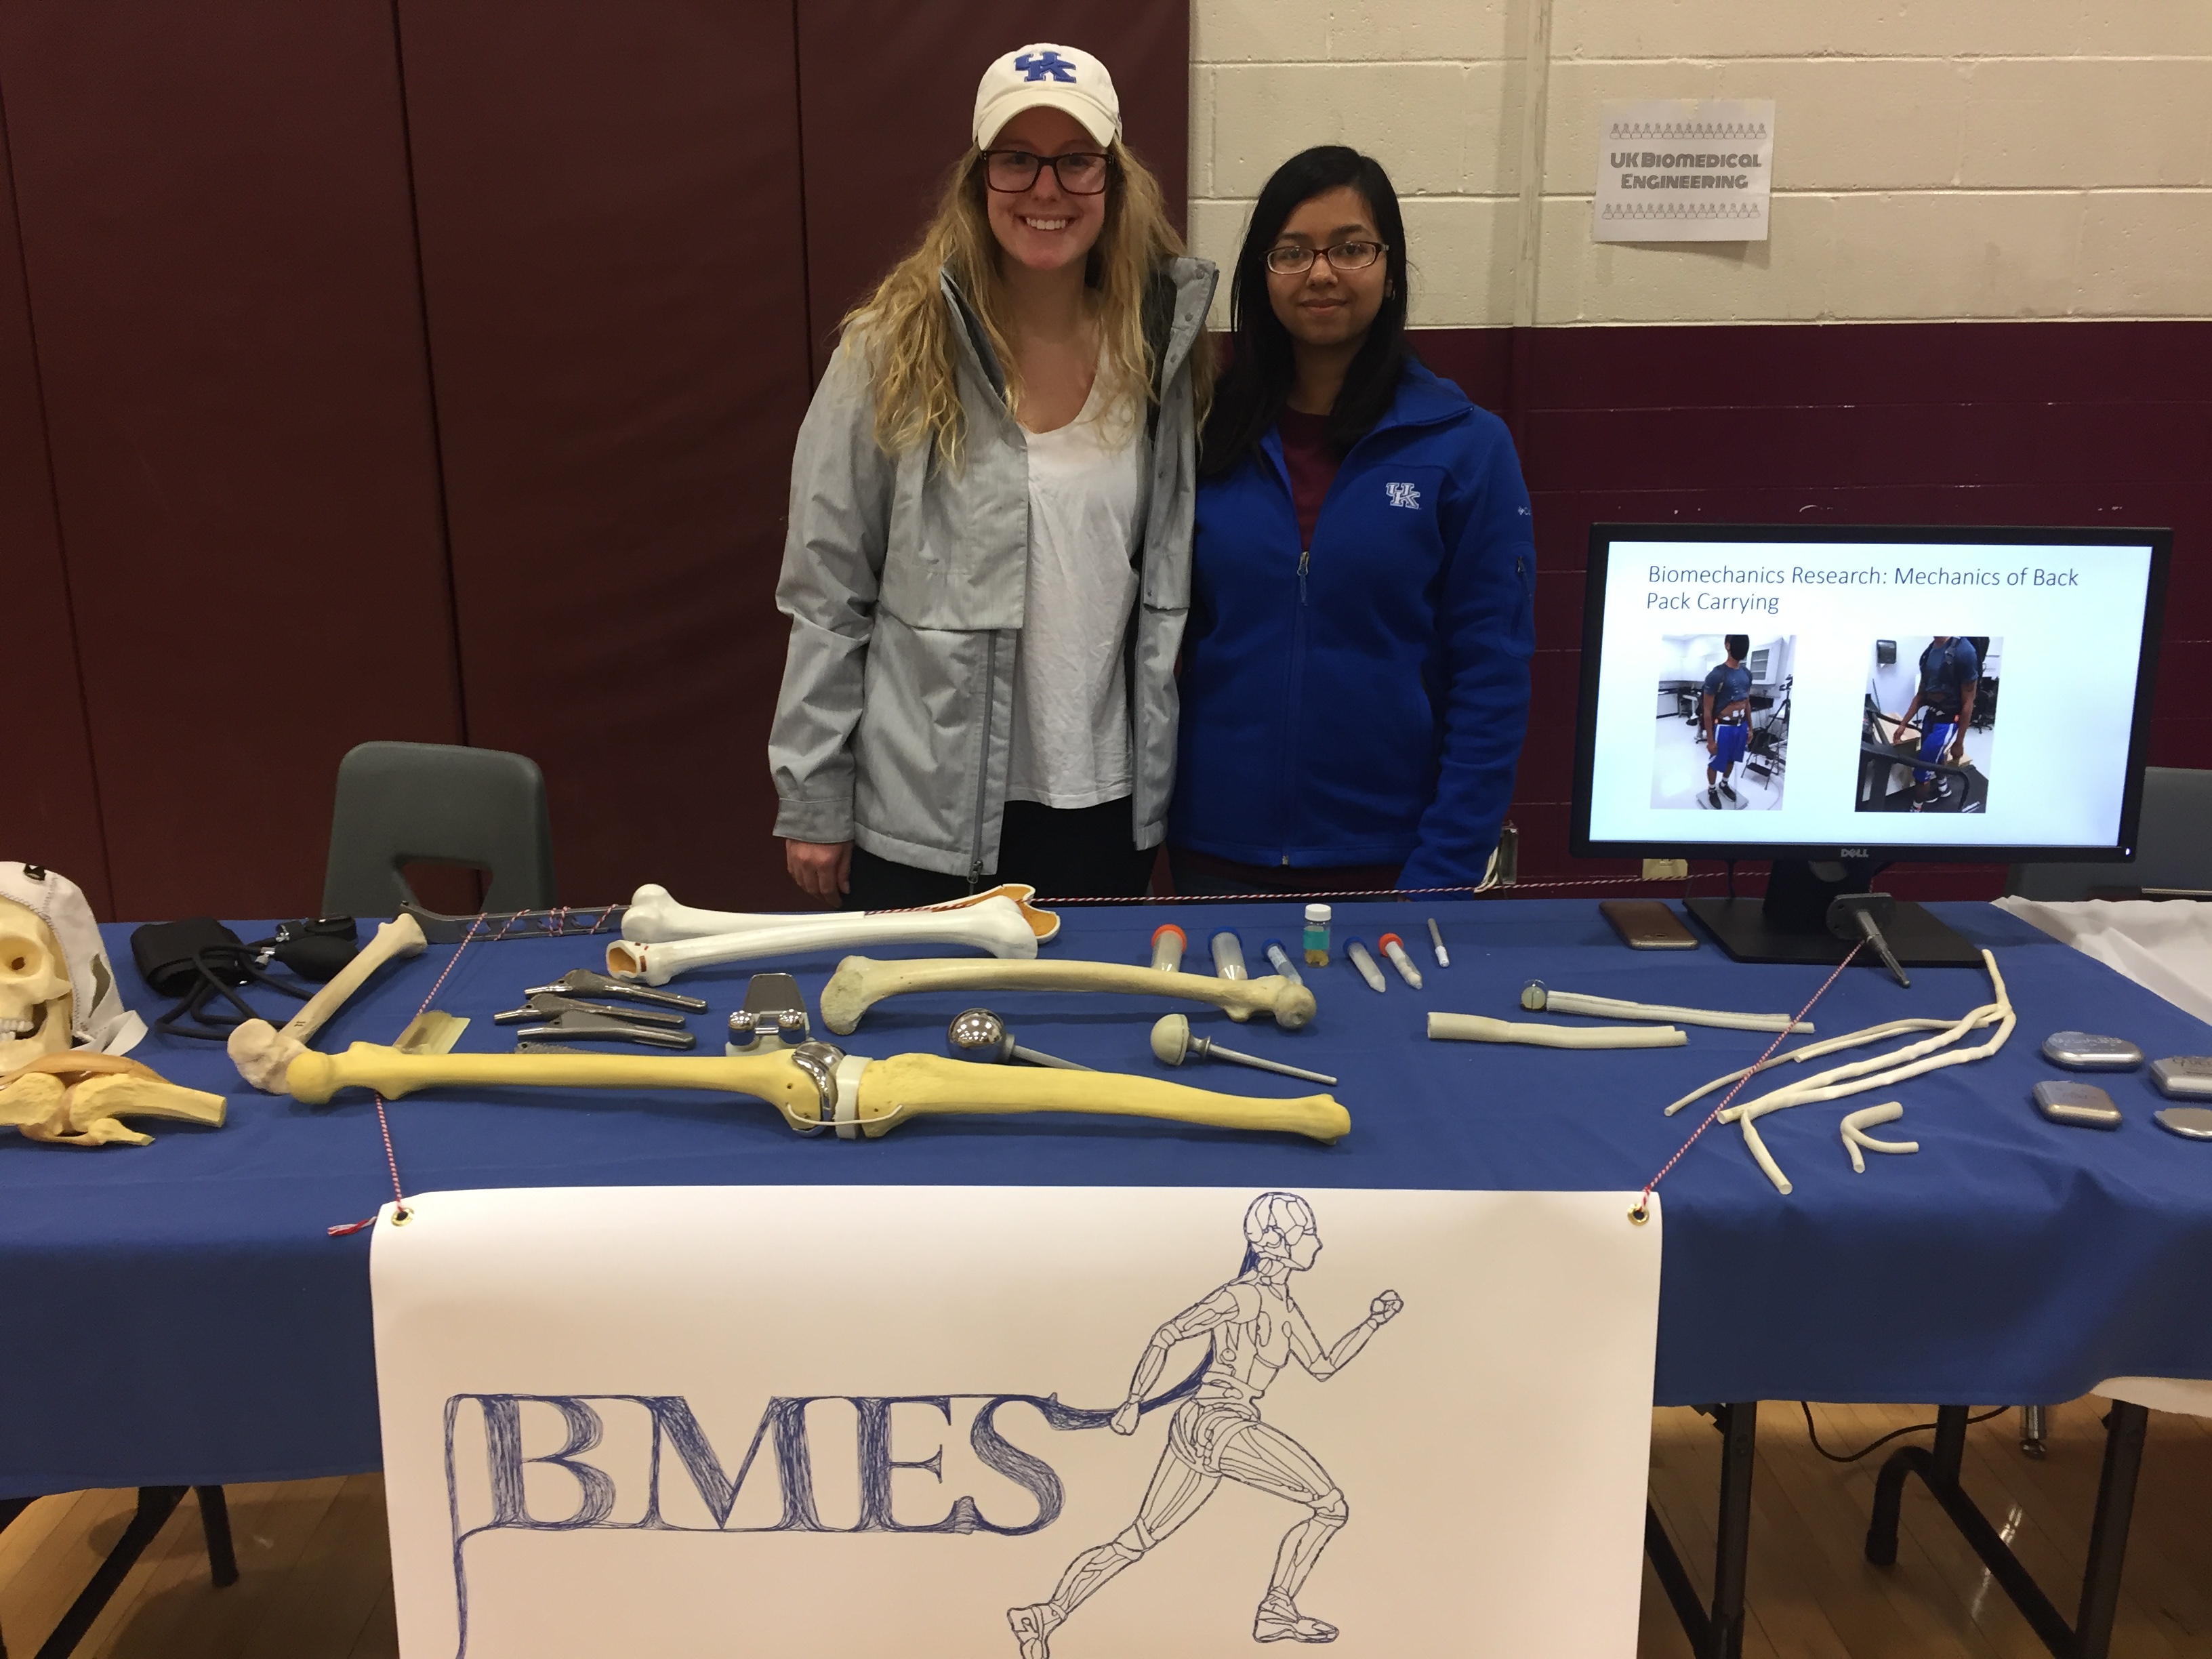 Lucy Niemeyer (left) and Tasneem Naheyan (right) behind the UK BMES Science Night booth at Leestown Middle School.